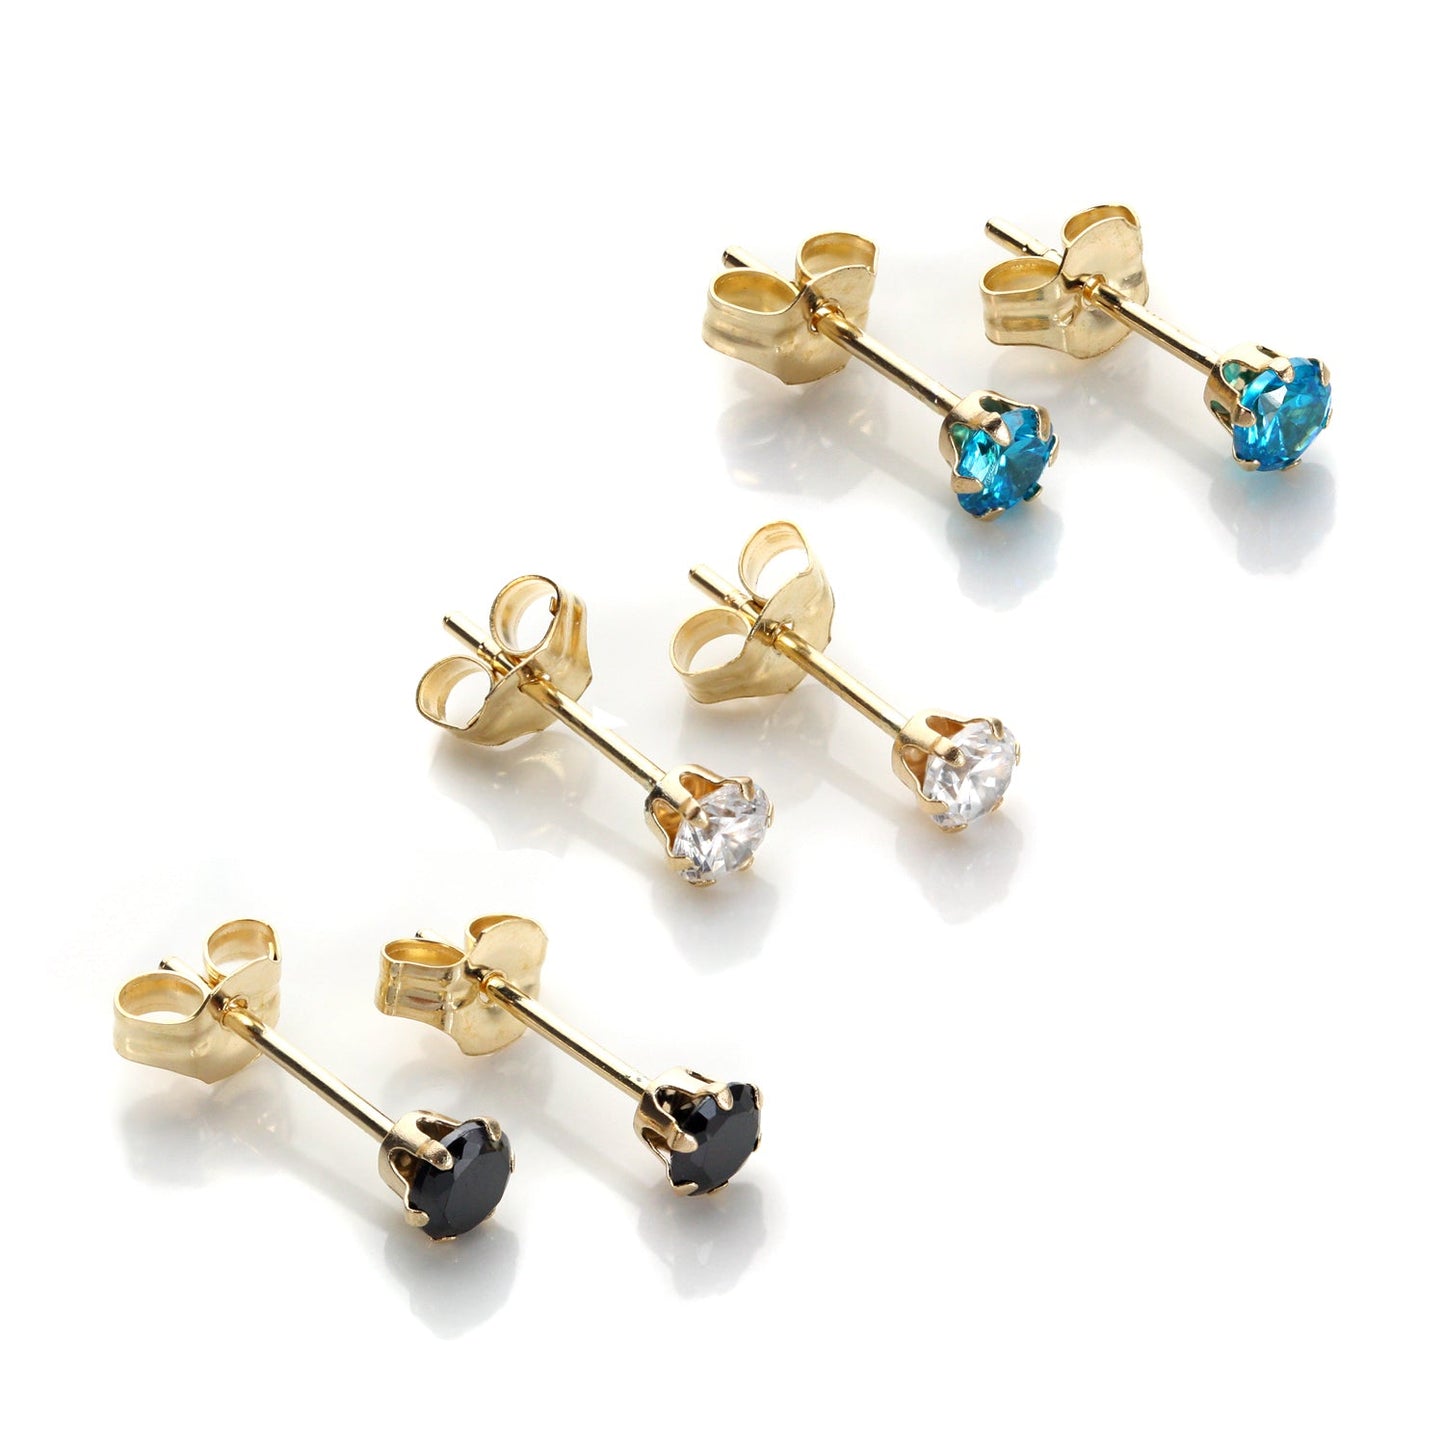 9ct Gold 3mm Evening Crystal Stud Earrings Set